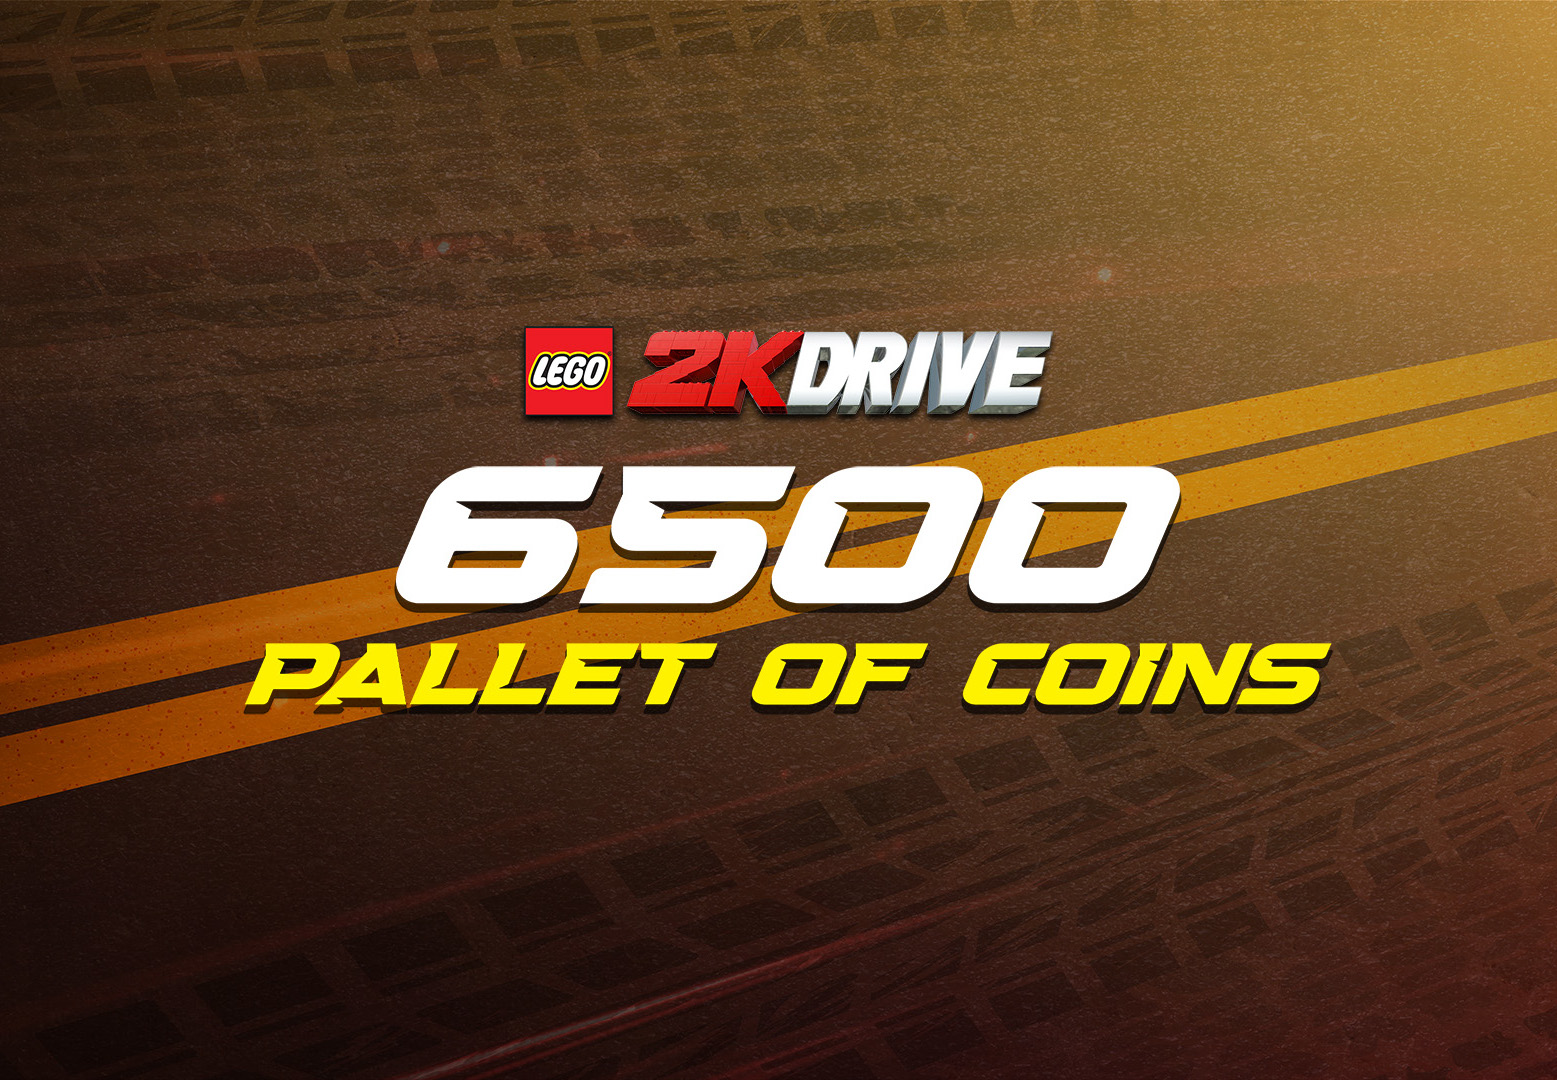 LEGO 2K Drive - Pallet of Coins XBOX One / Xbox Series X|S CD Key, 50.48 usd